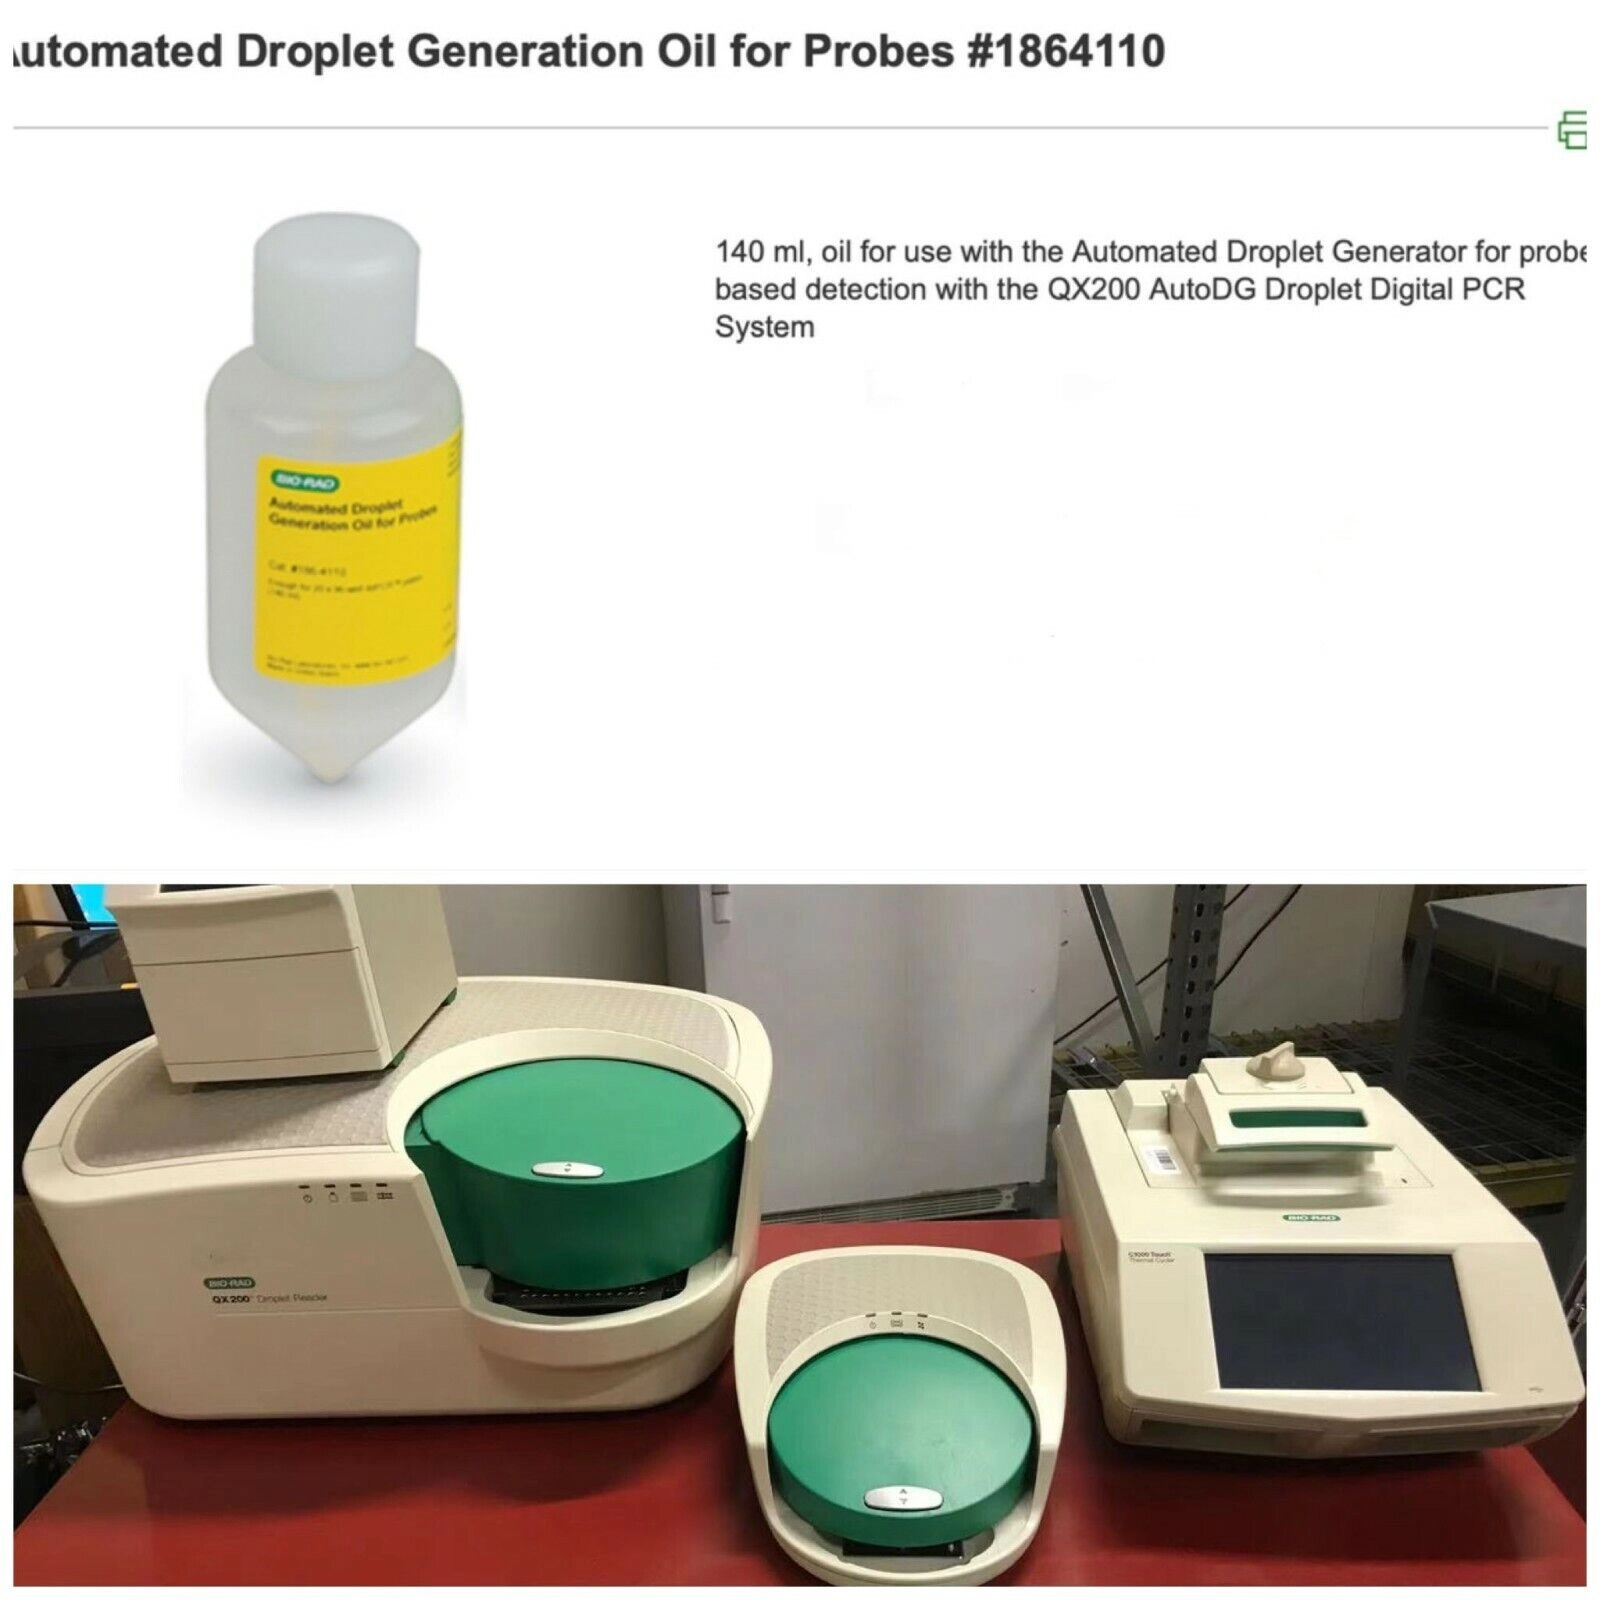 Bio-Rad Automated Droplet Generation Oil for Probe